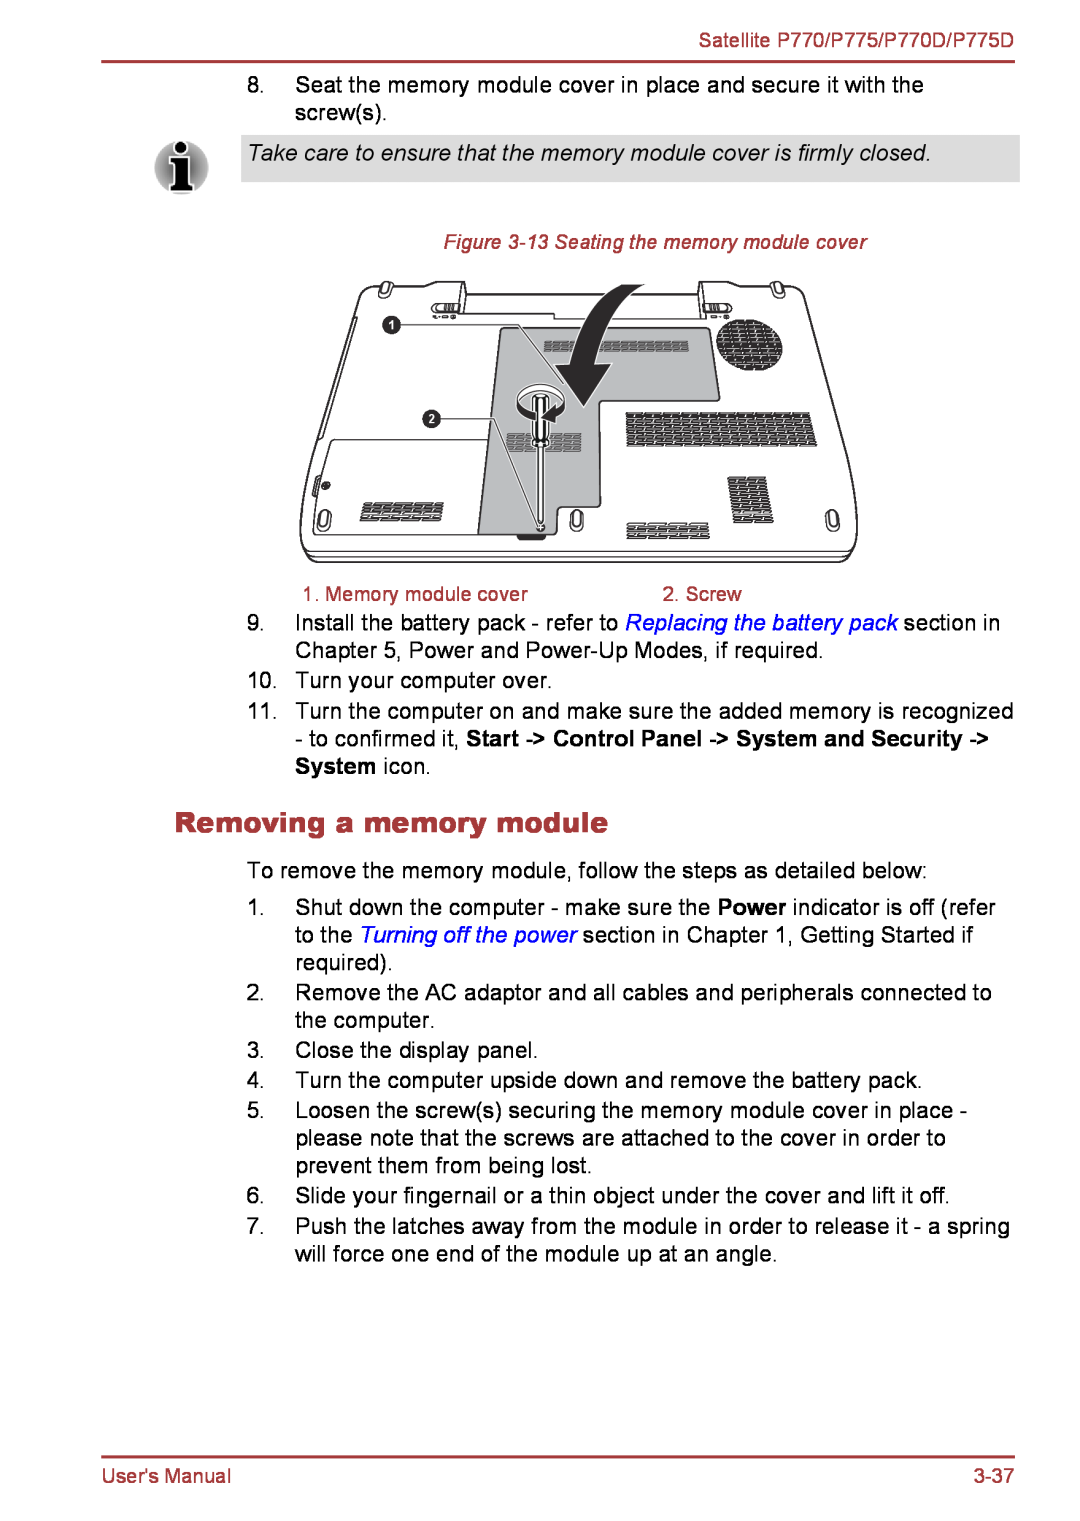 Toshiba P770 user manual Removing a memory module, Take care to ensure that the memory module cover is firmly closed 